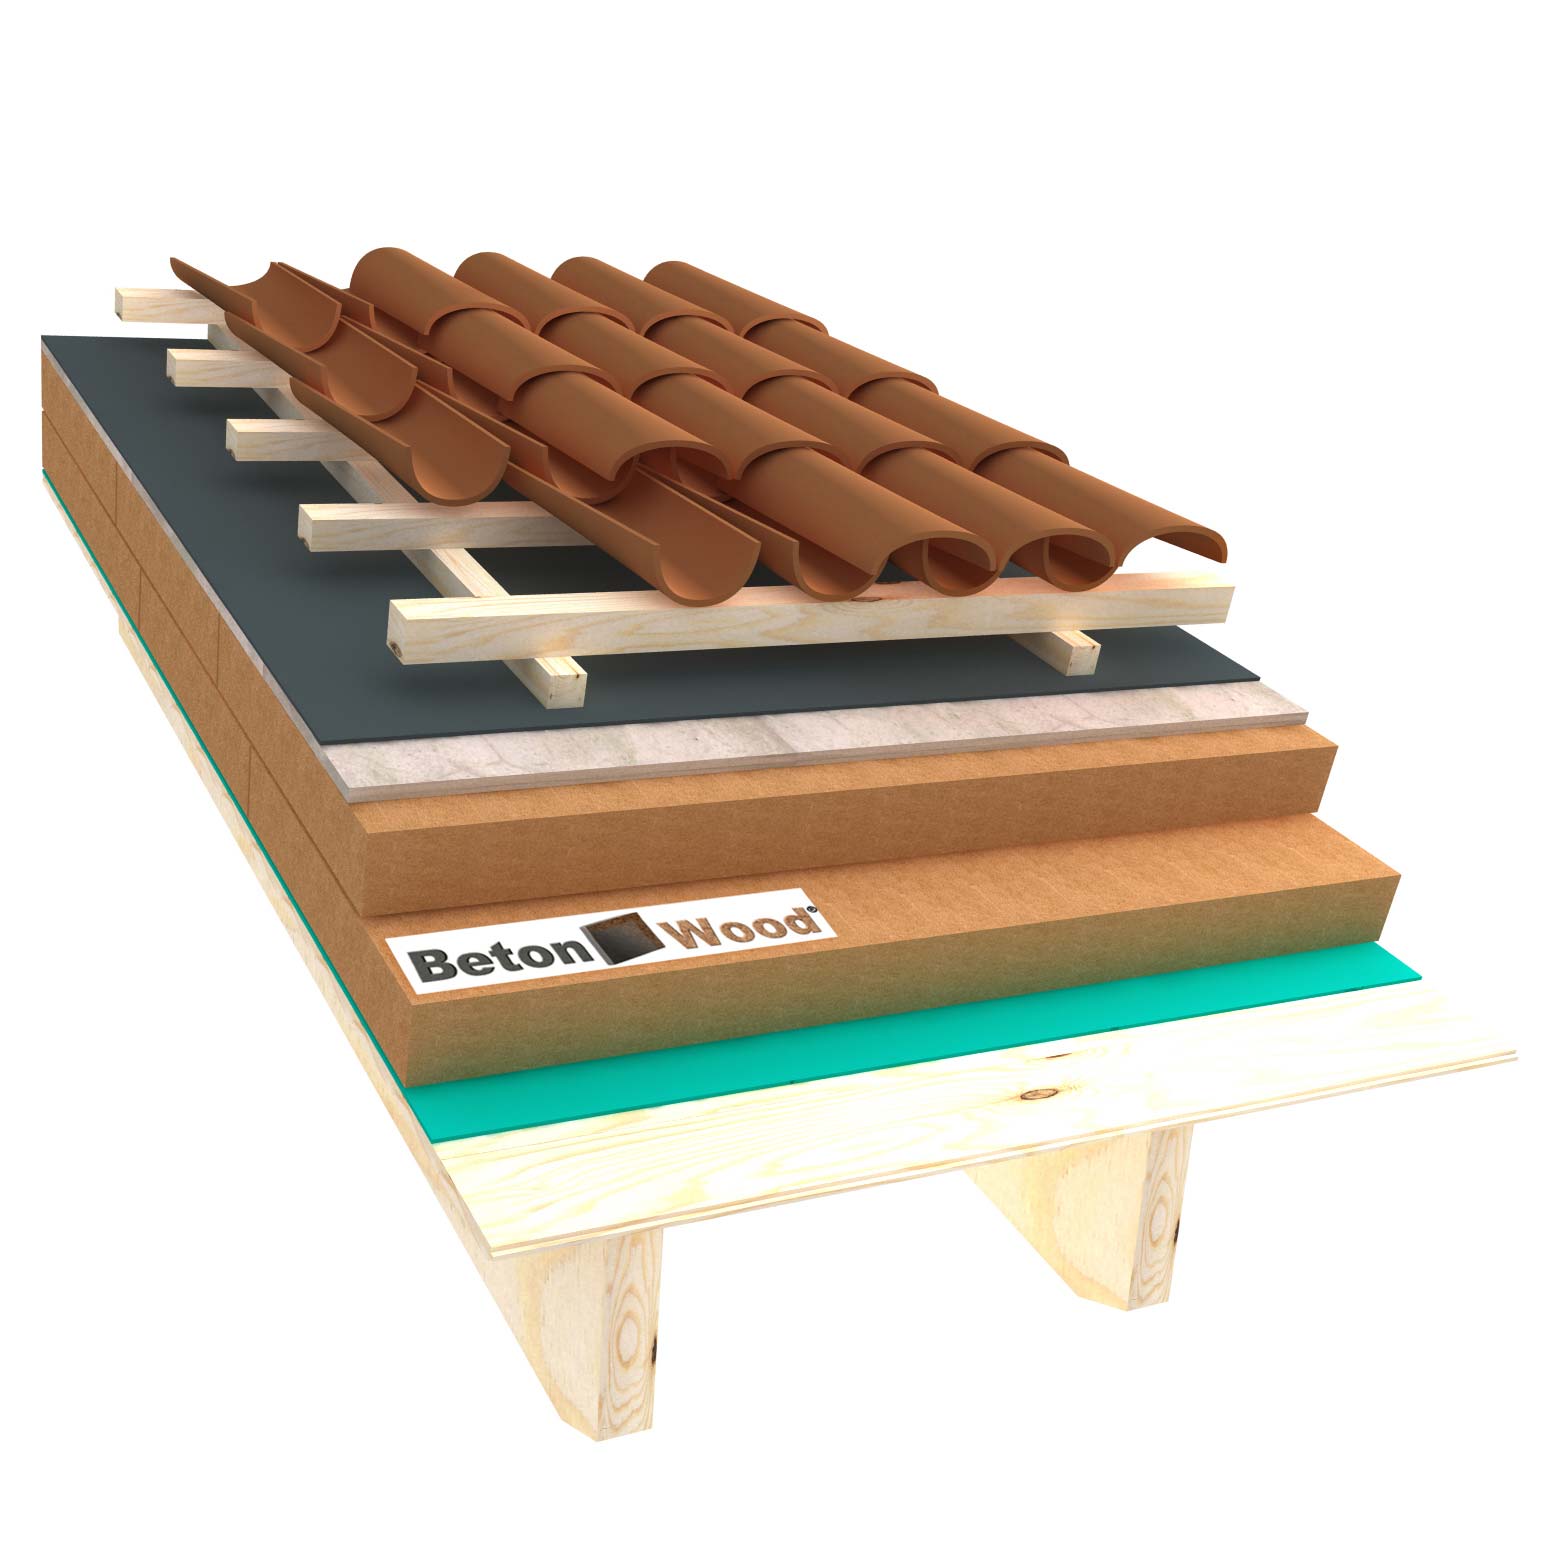 Ventilated roof with wood fiber Universal and cement bonded particle boards on matchboarding